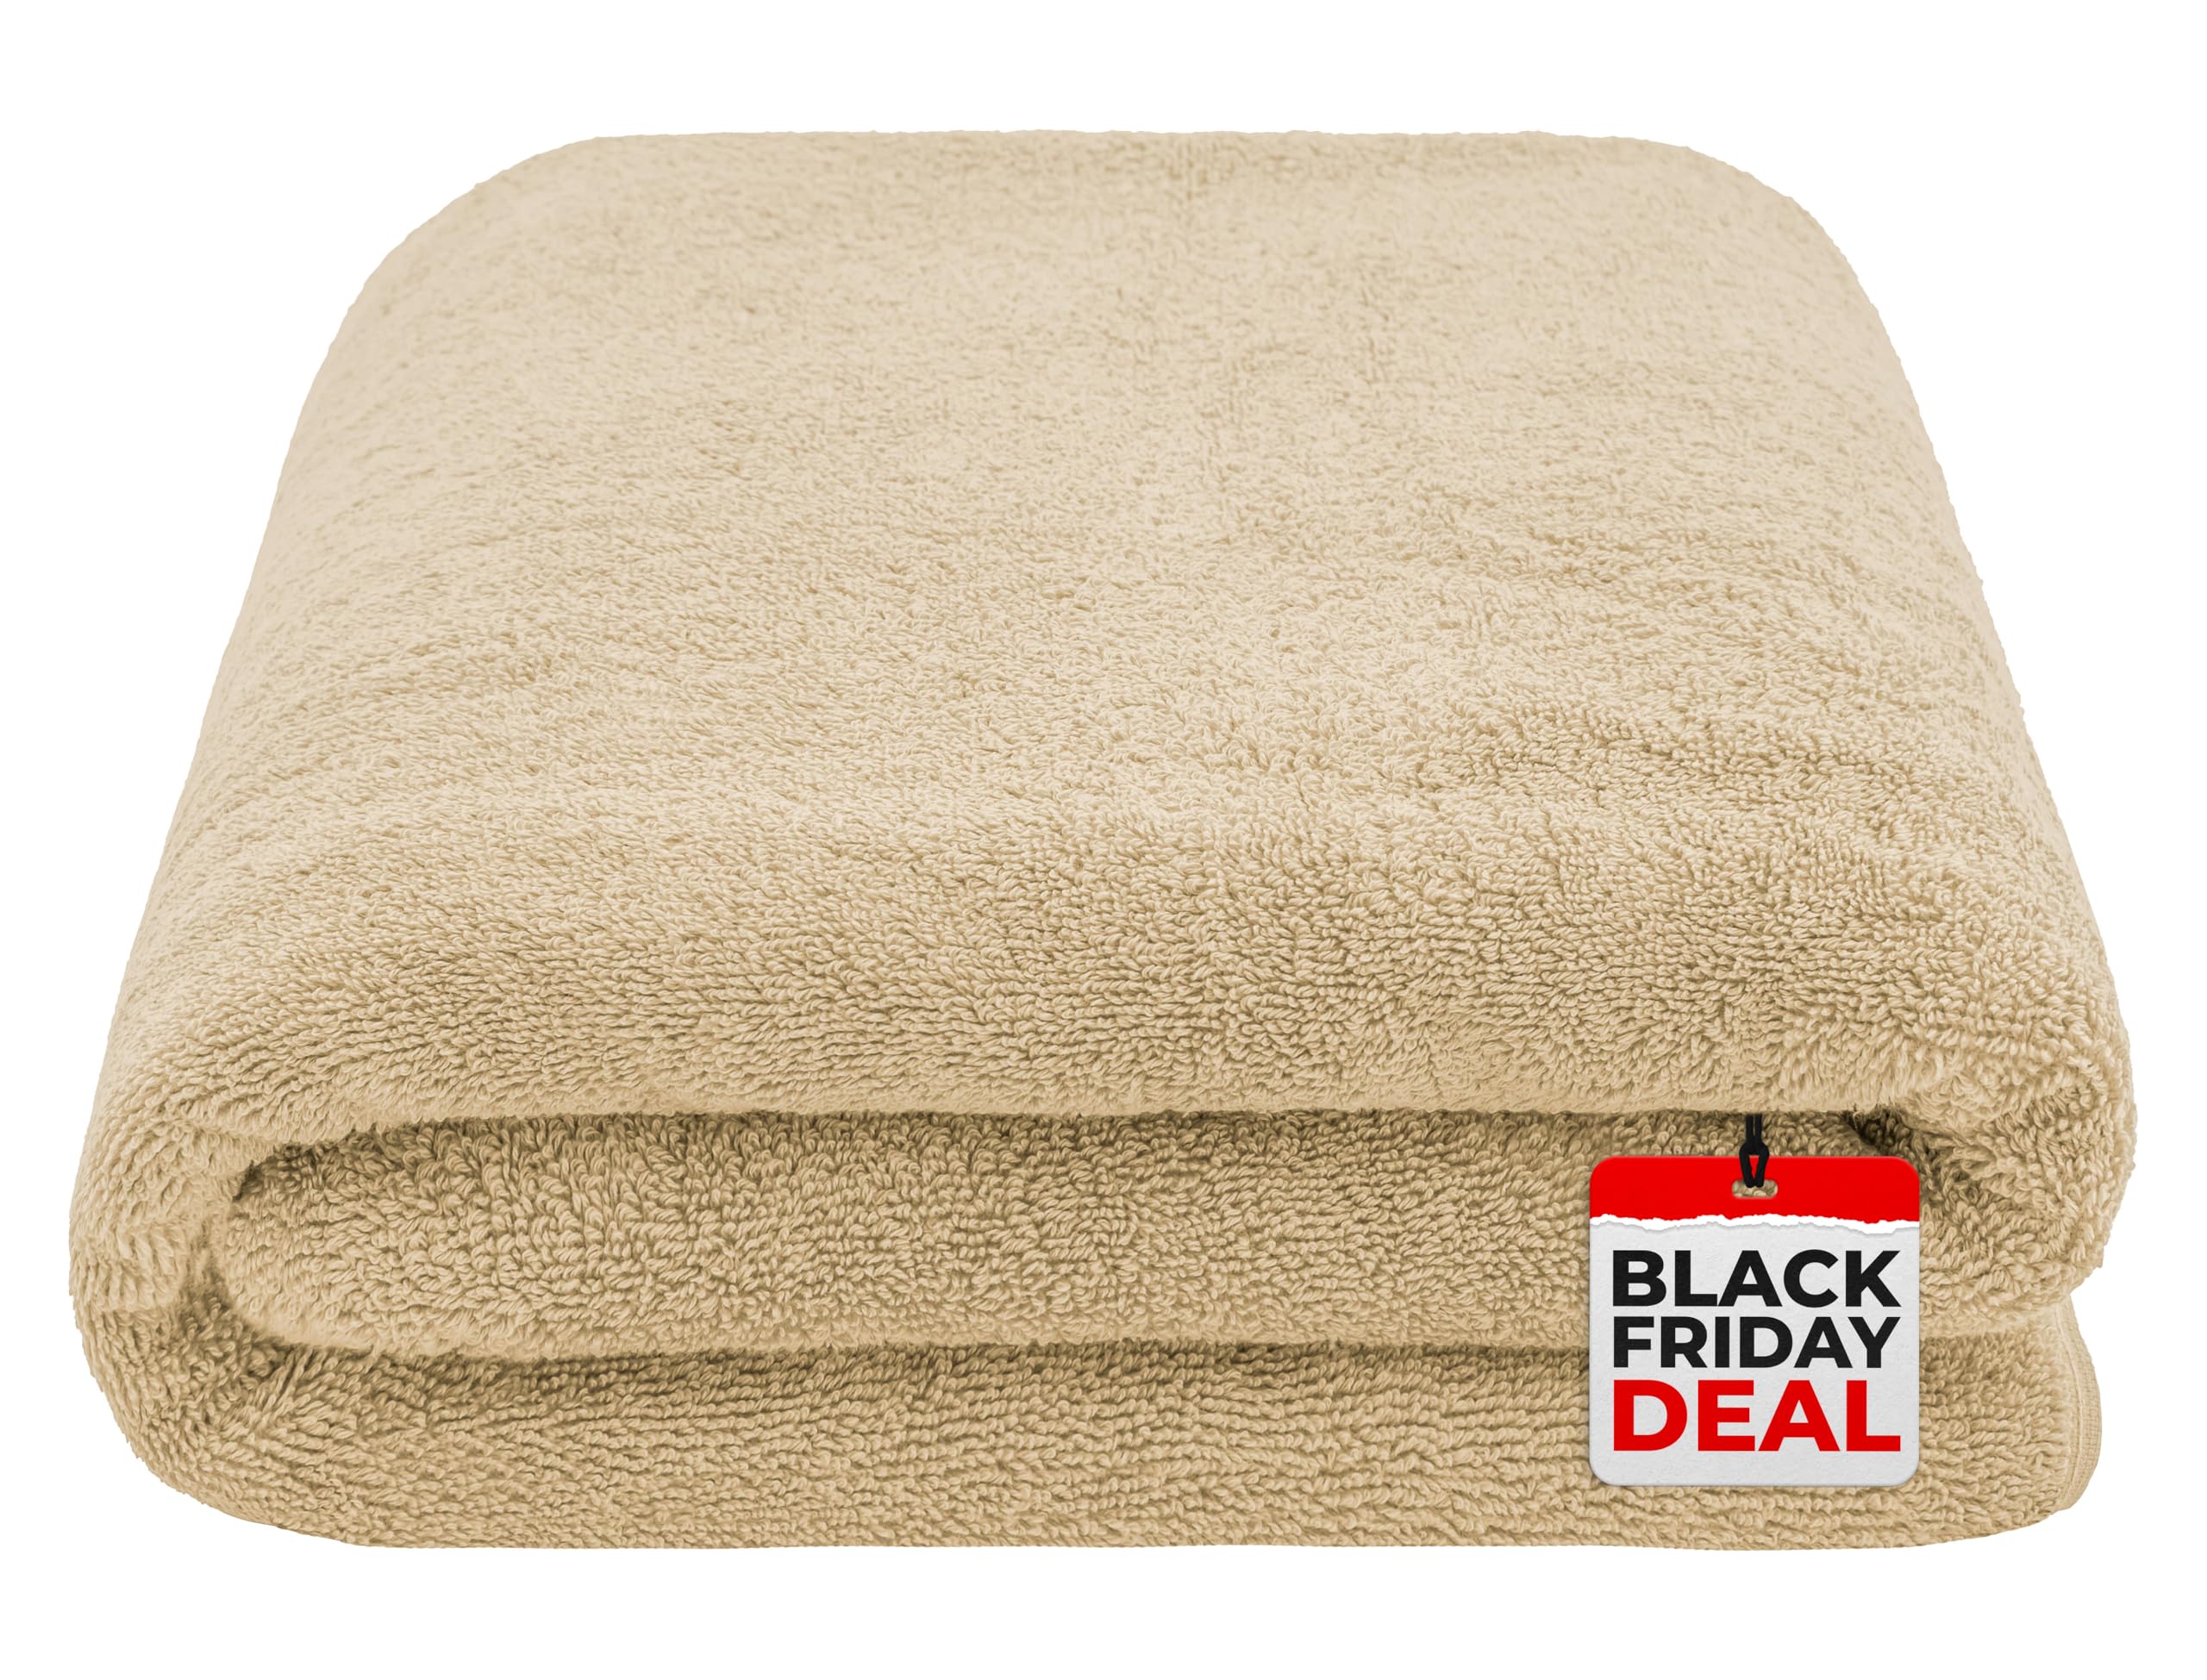 Oversized Bath Towels Extra Large 40x80 Inches Bath Sheets for